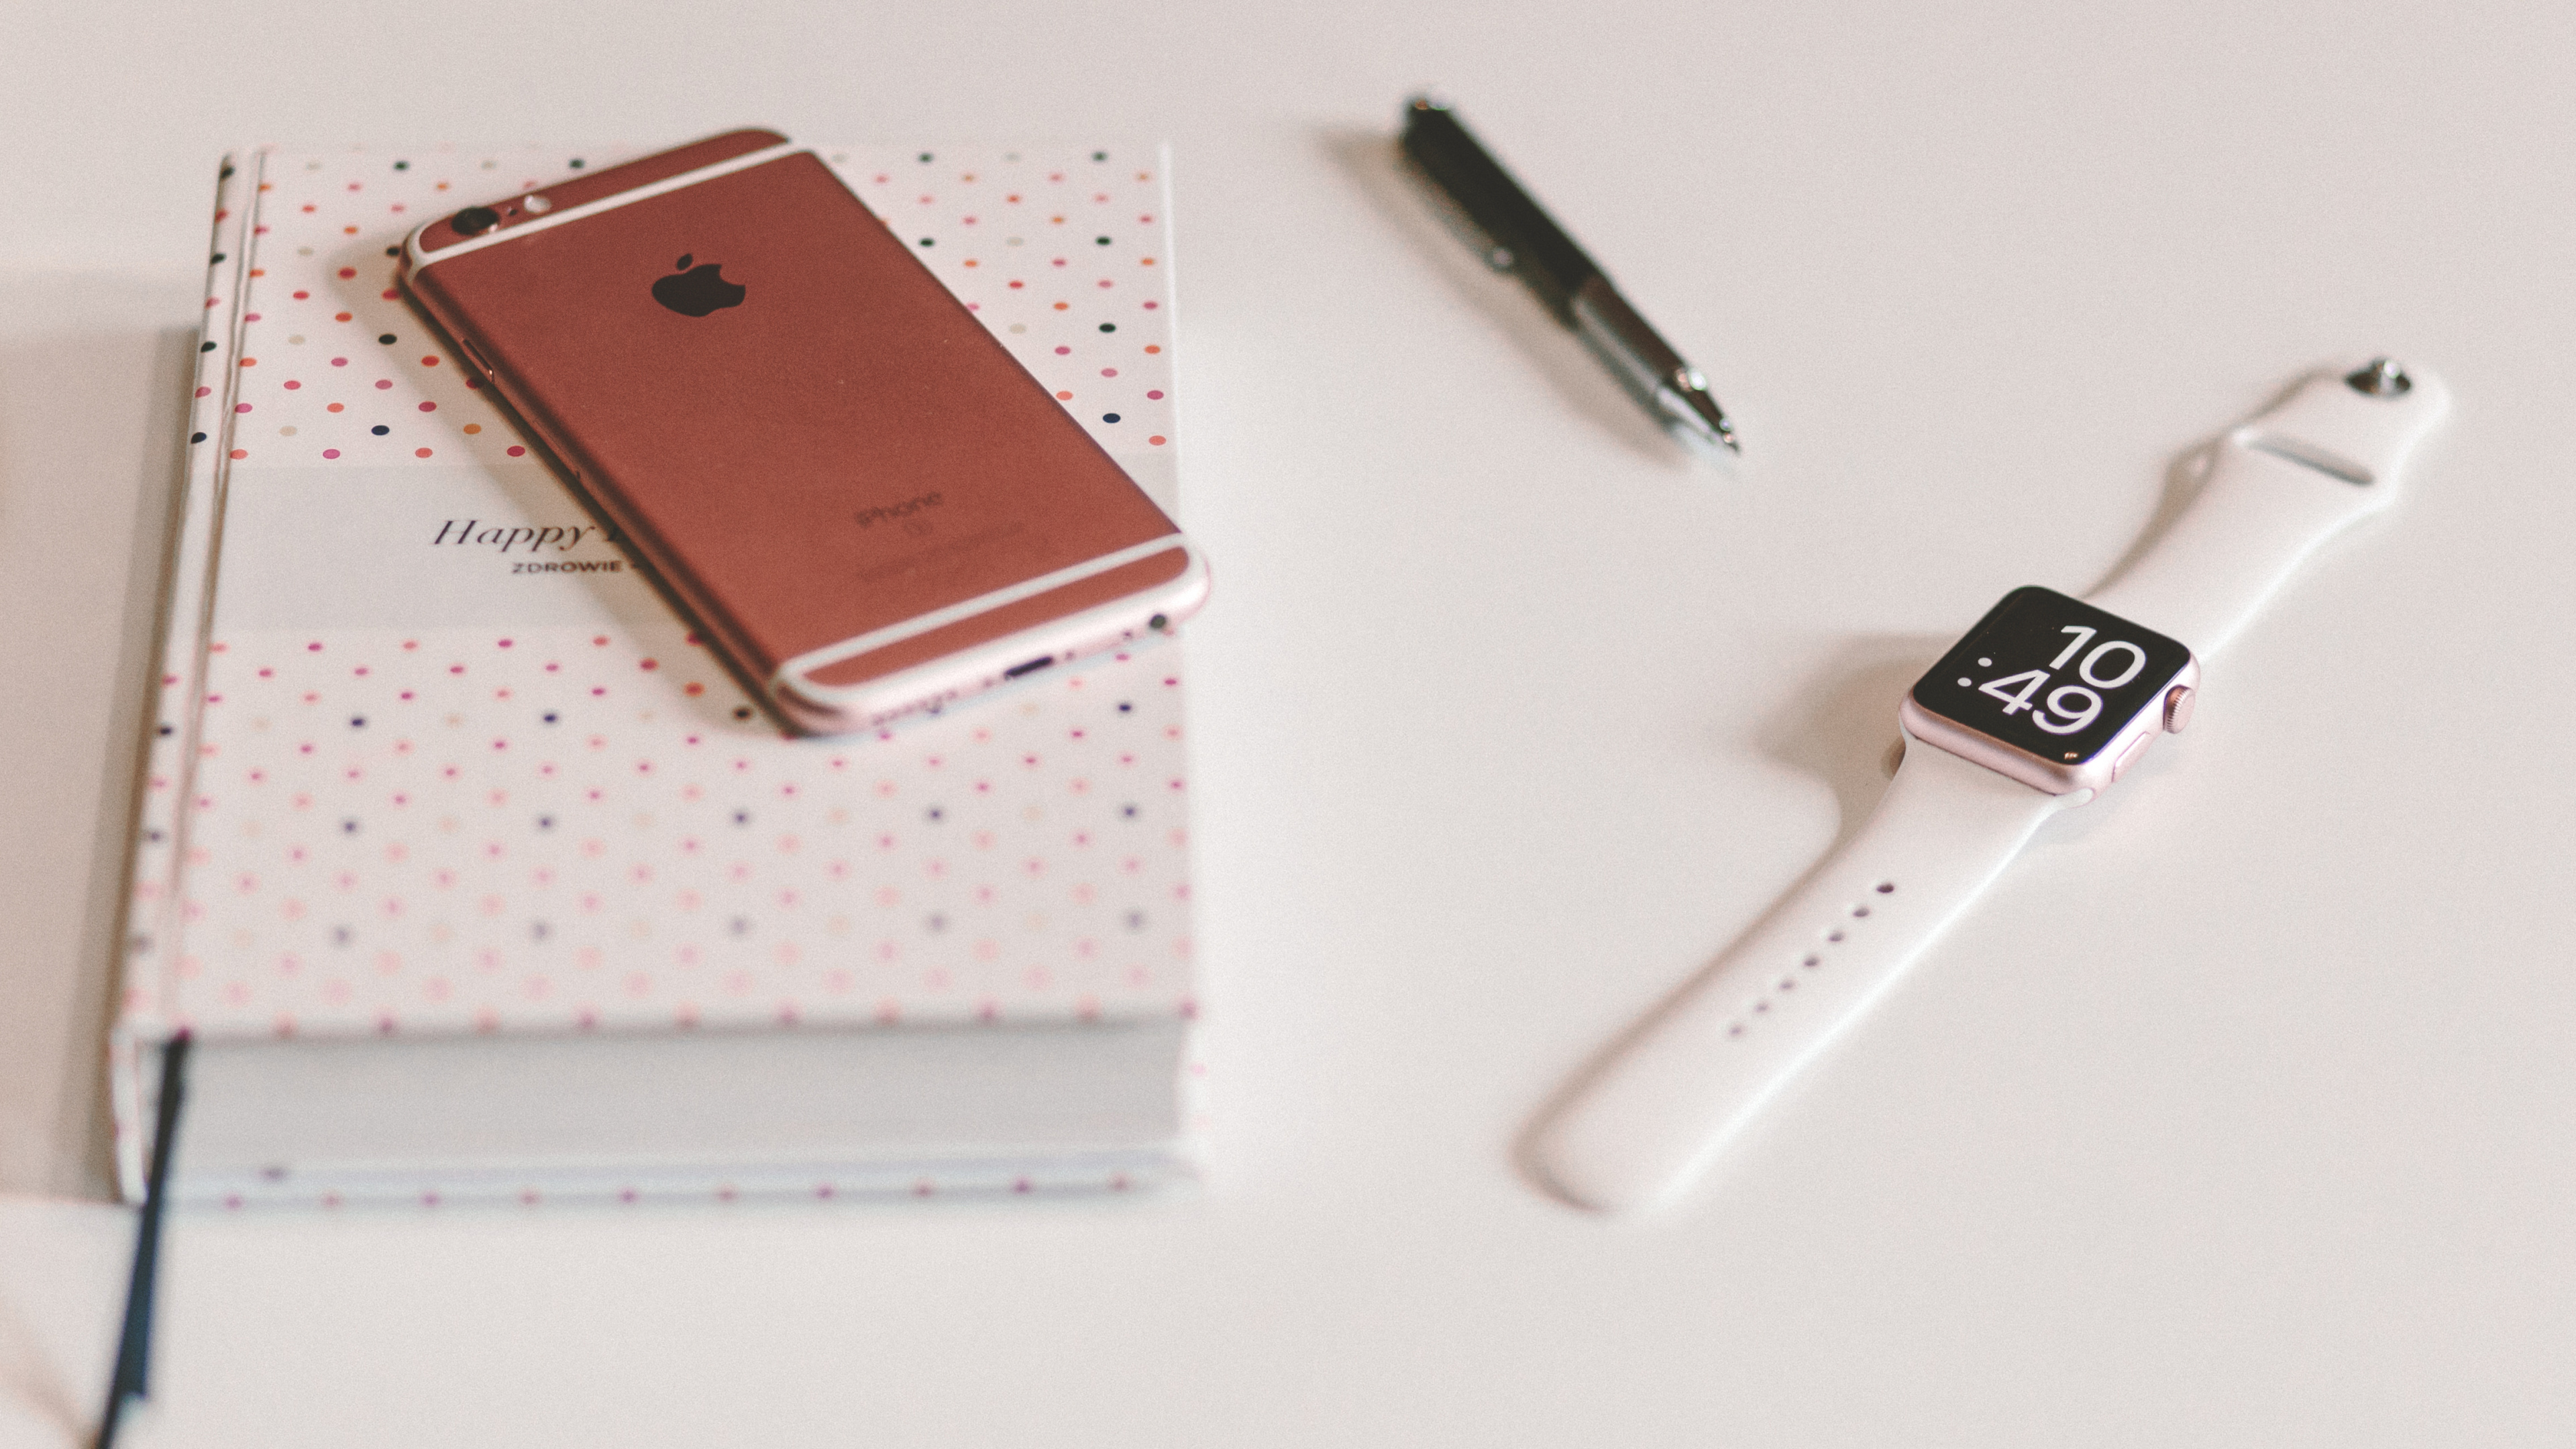 Silver Apple Watch With White Sport Band Beside Black Click Pen. Wallpaper in 3840x2160 Resolution